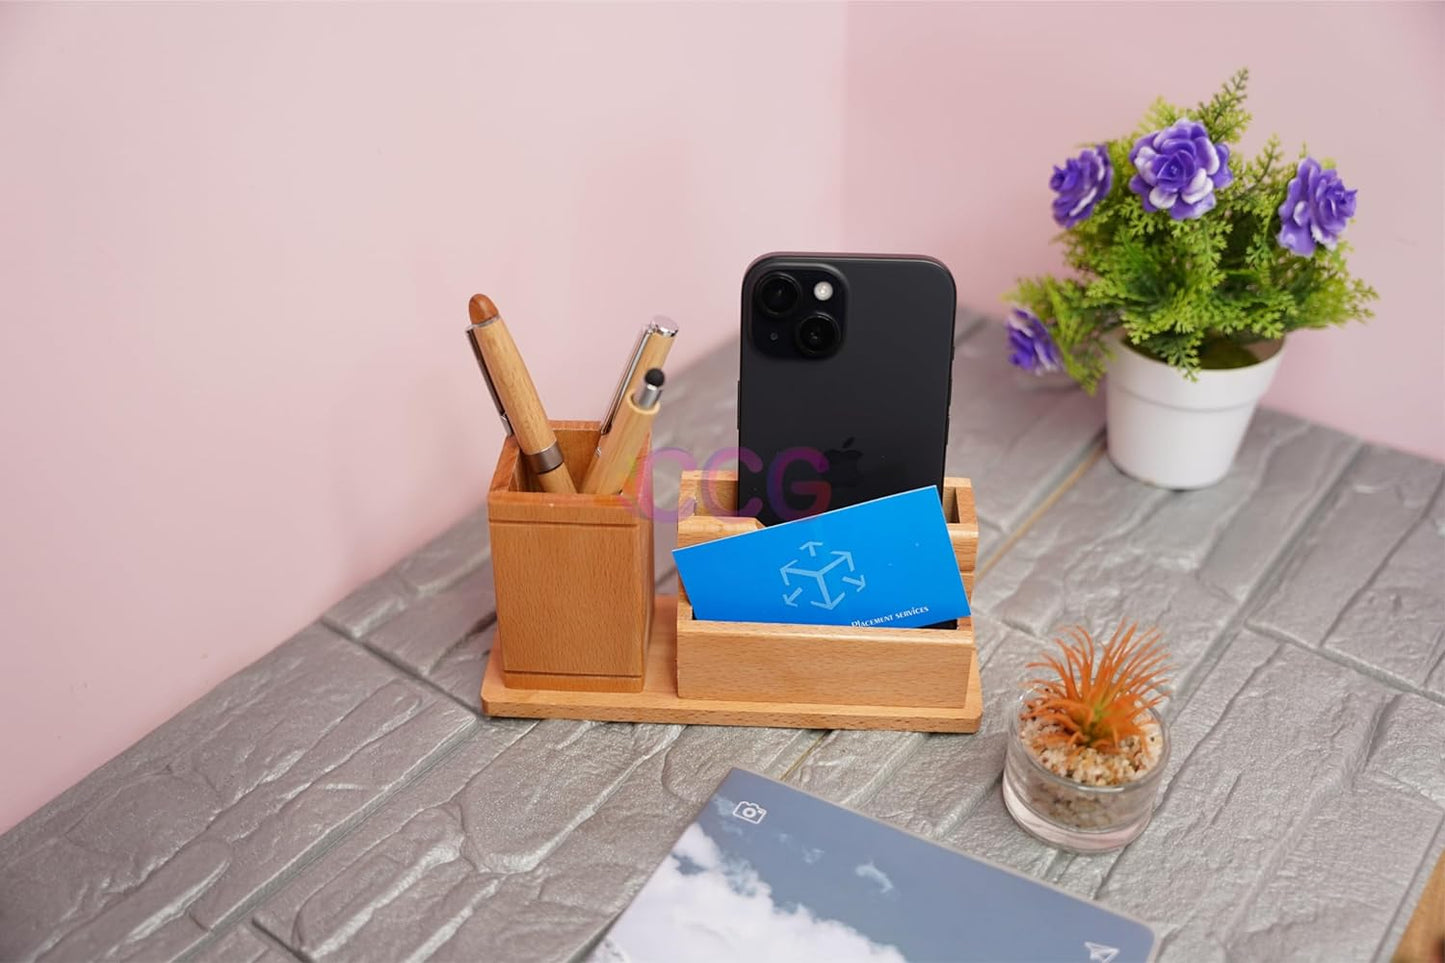 Craft Closet & Gifts - Wooden Pen Pencil Holder Stand with Card Slot and Mobile Holder - Design 2 - Personalized Office Accessory for IAS, Advocate, Office & Corporate Gifts